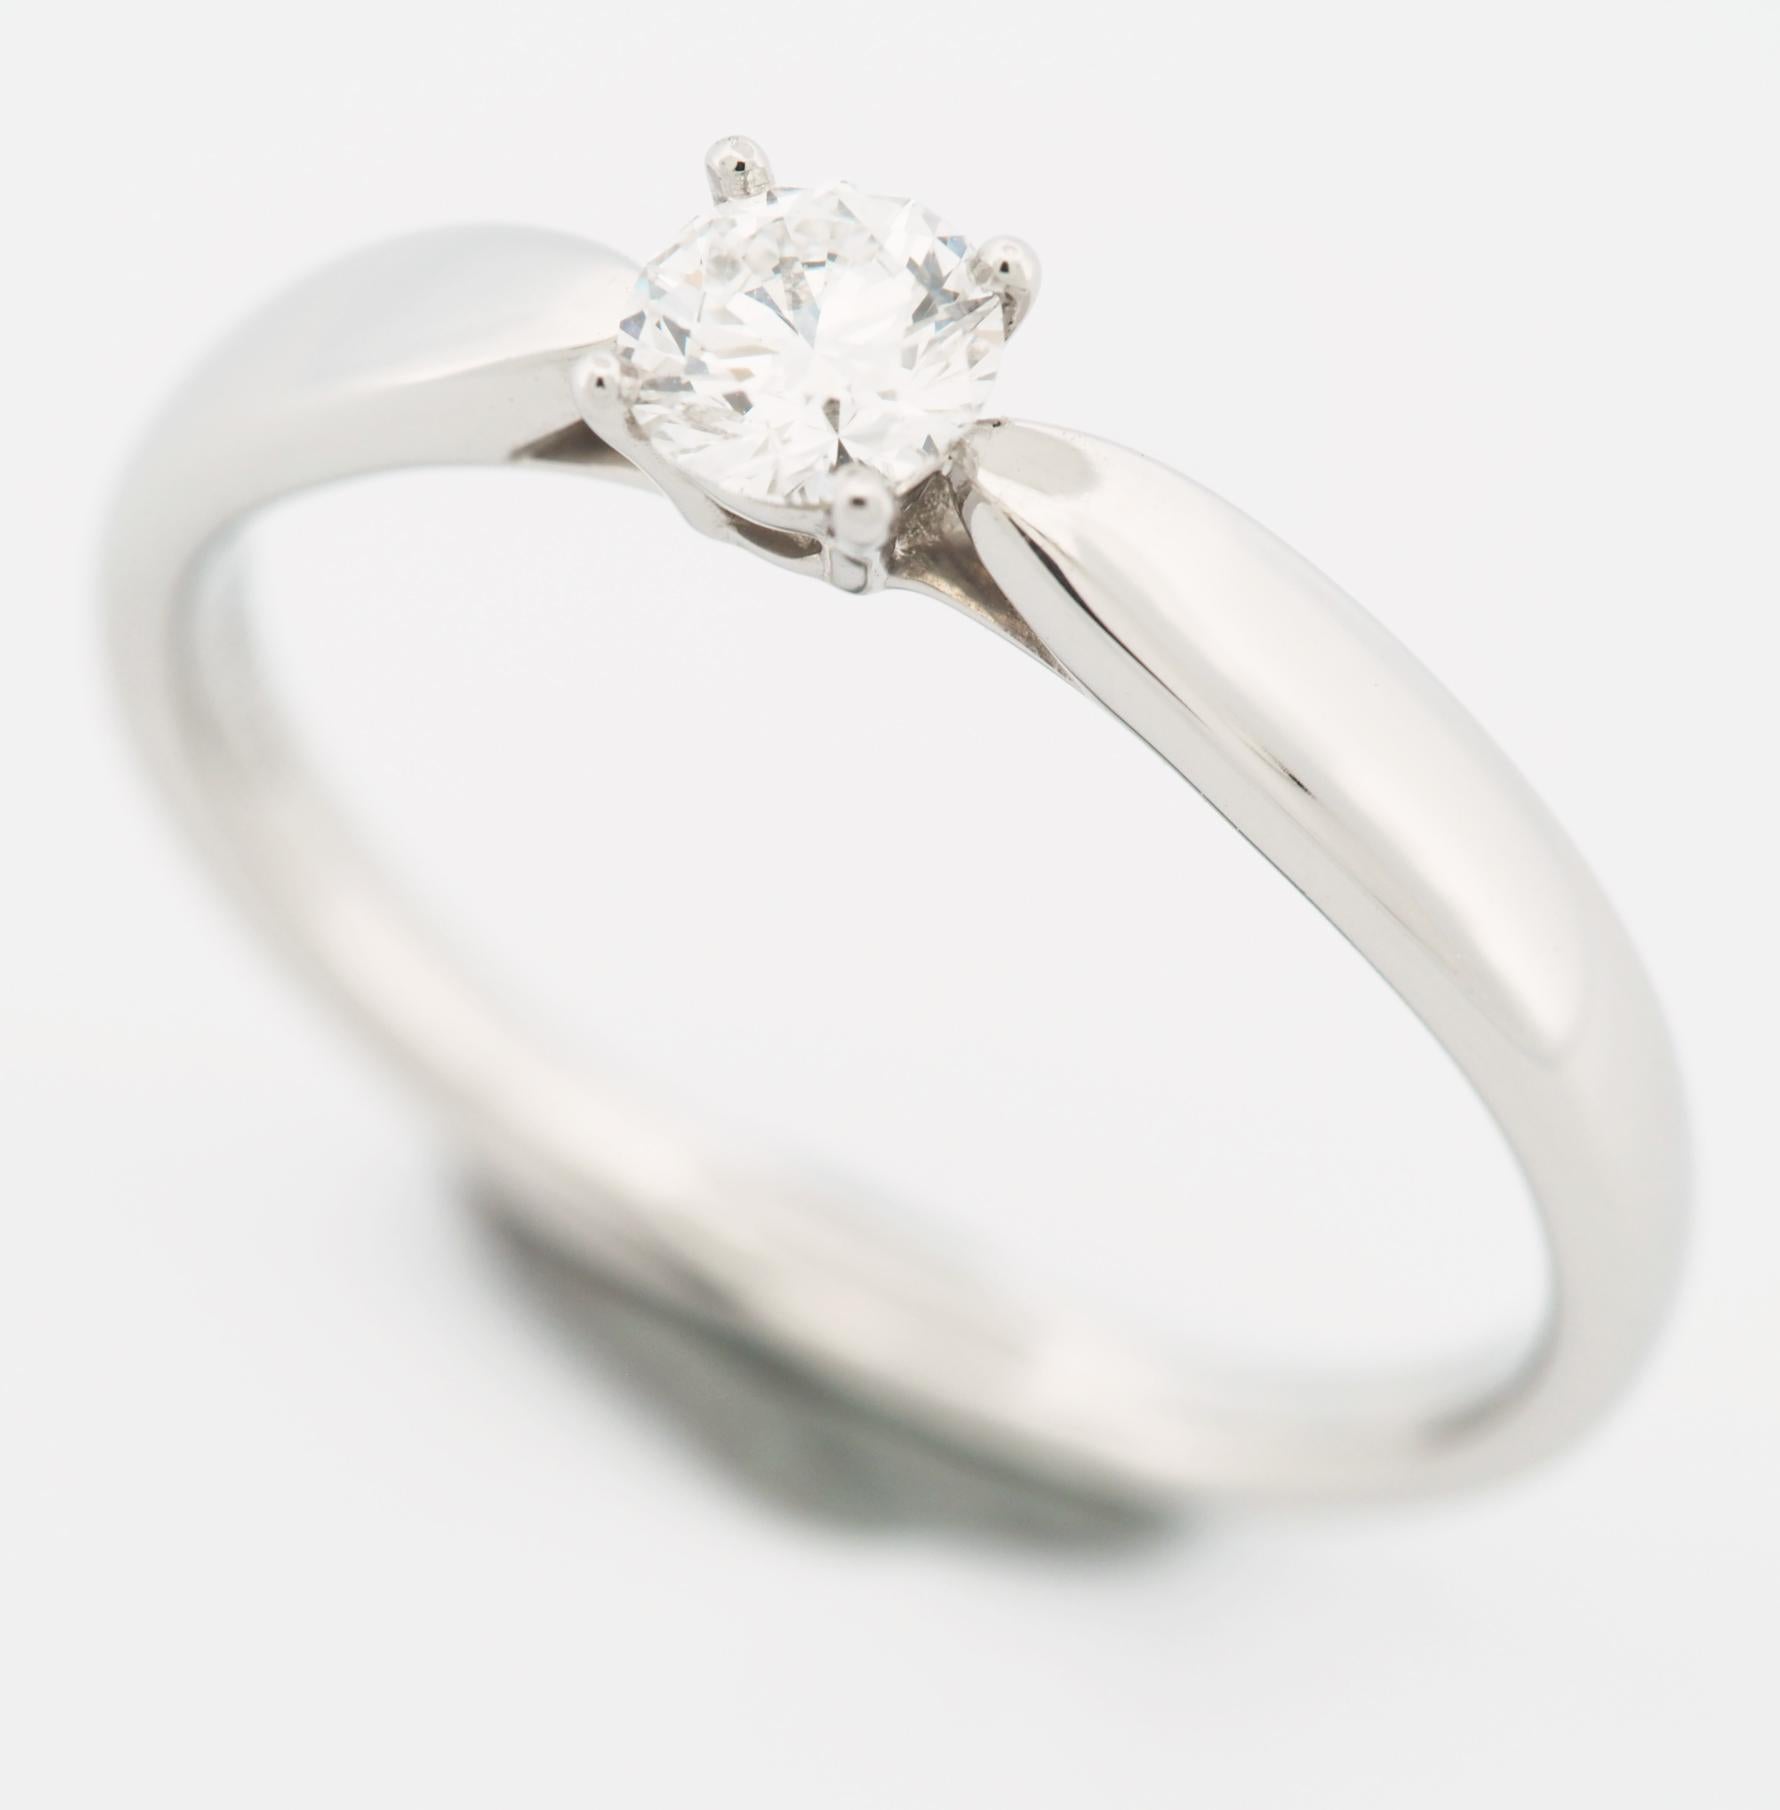 Item: Tiffany Harmony Solitaire Diamond Ring 
Stones: Diamond / 0.25ct
Color: F
Clarity: IF
Polish: Excellent
Symmetry: Excellent
Fluorescence: None
Metal: Platinum 950
Ring Size: US SIZE 5.75-6.0 UK SIZE L
Internal Diameter: 16.50 mm
Measurements: